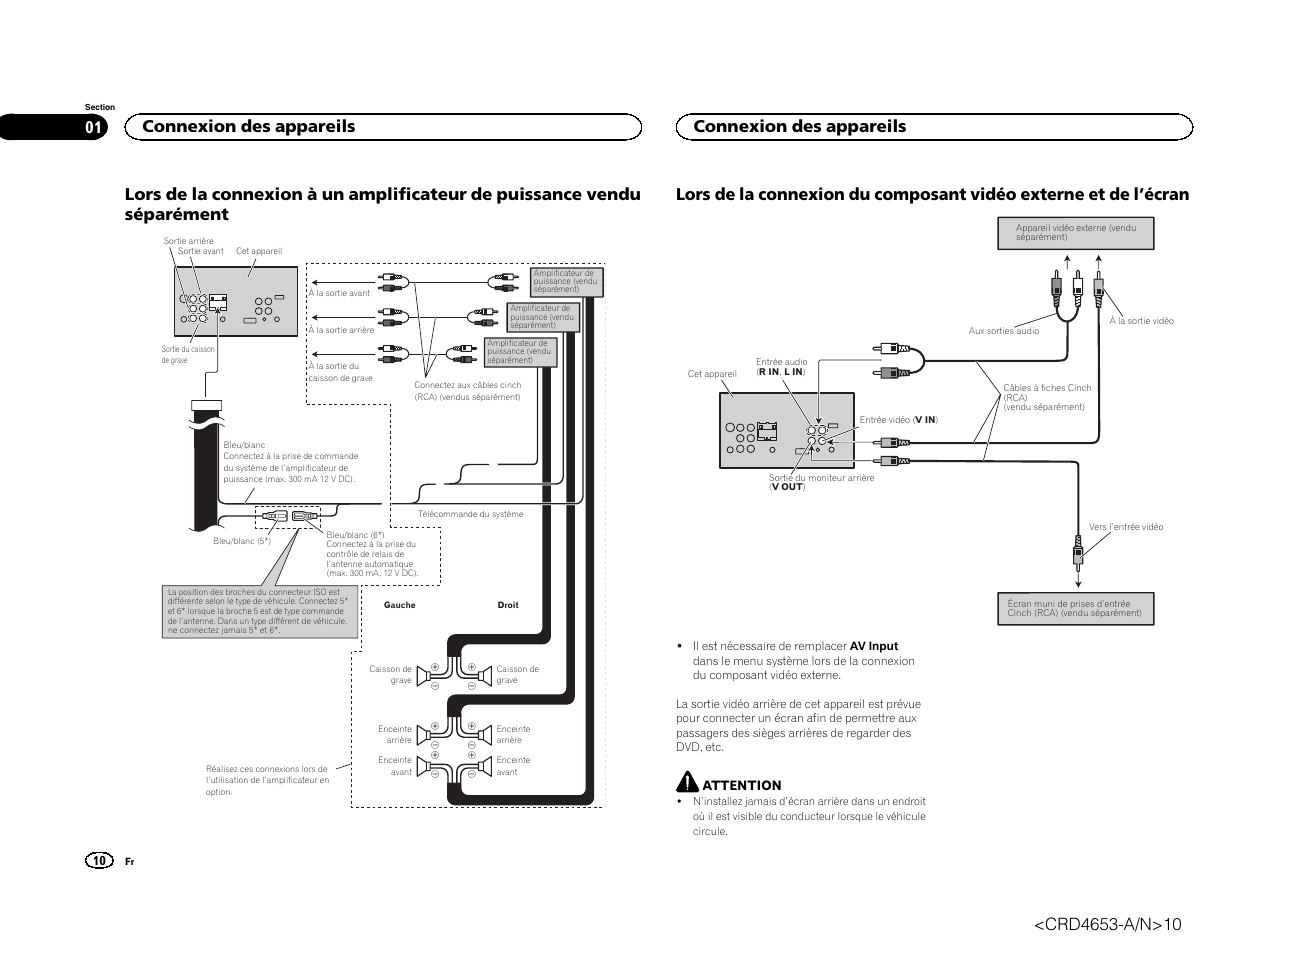 Connexion des appareils | Pioneer AVH-X1500DVD User Manual | Page 10 / 40